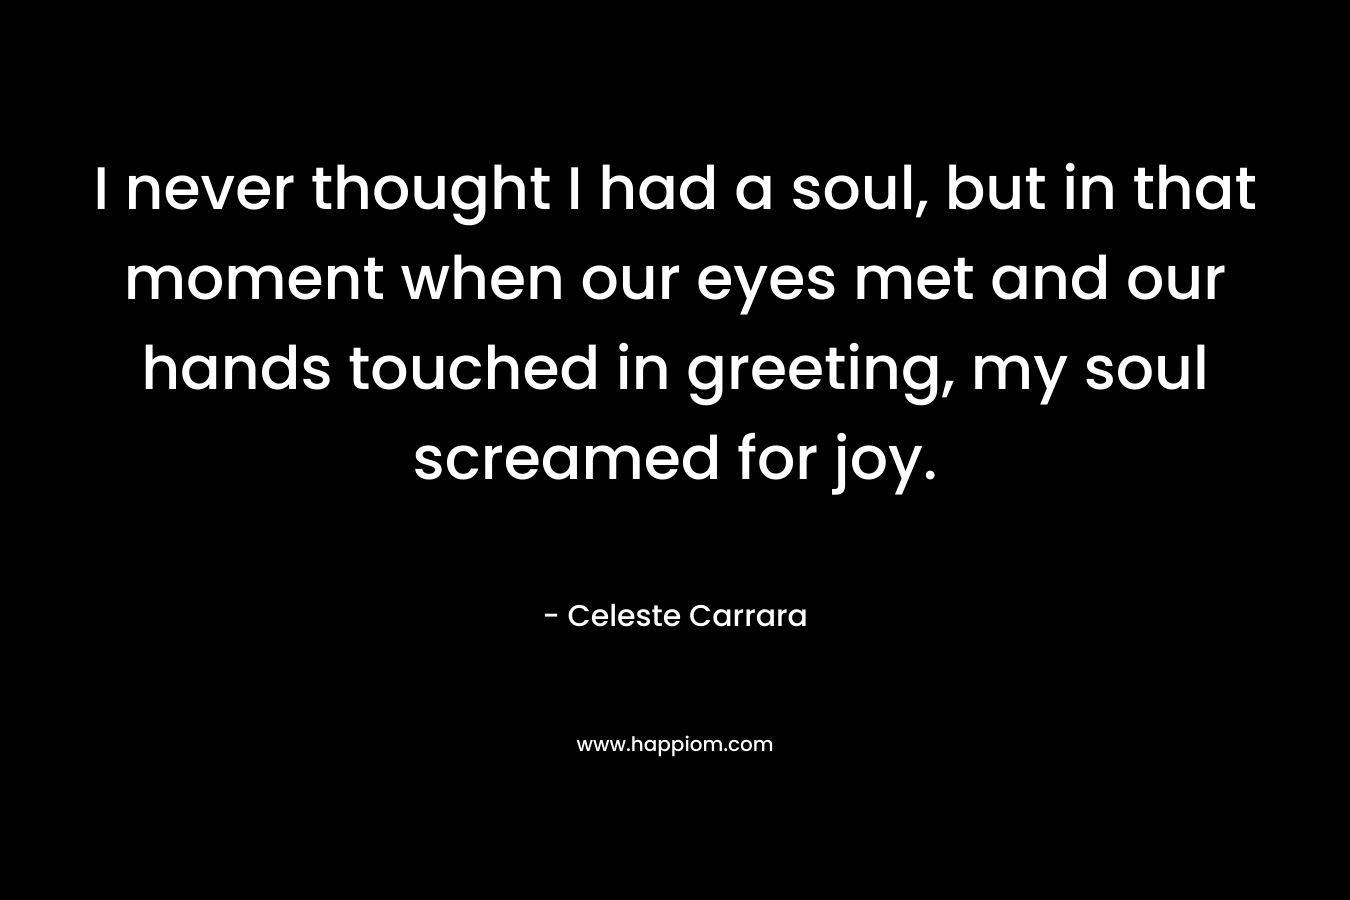 I never thought I had a soul, but in that moment when our eyes met and our hands touched in greeting, my soul screamed for joy. – Celeste Carrara